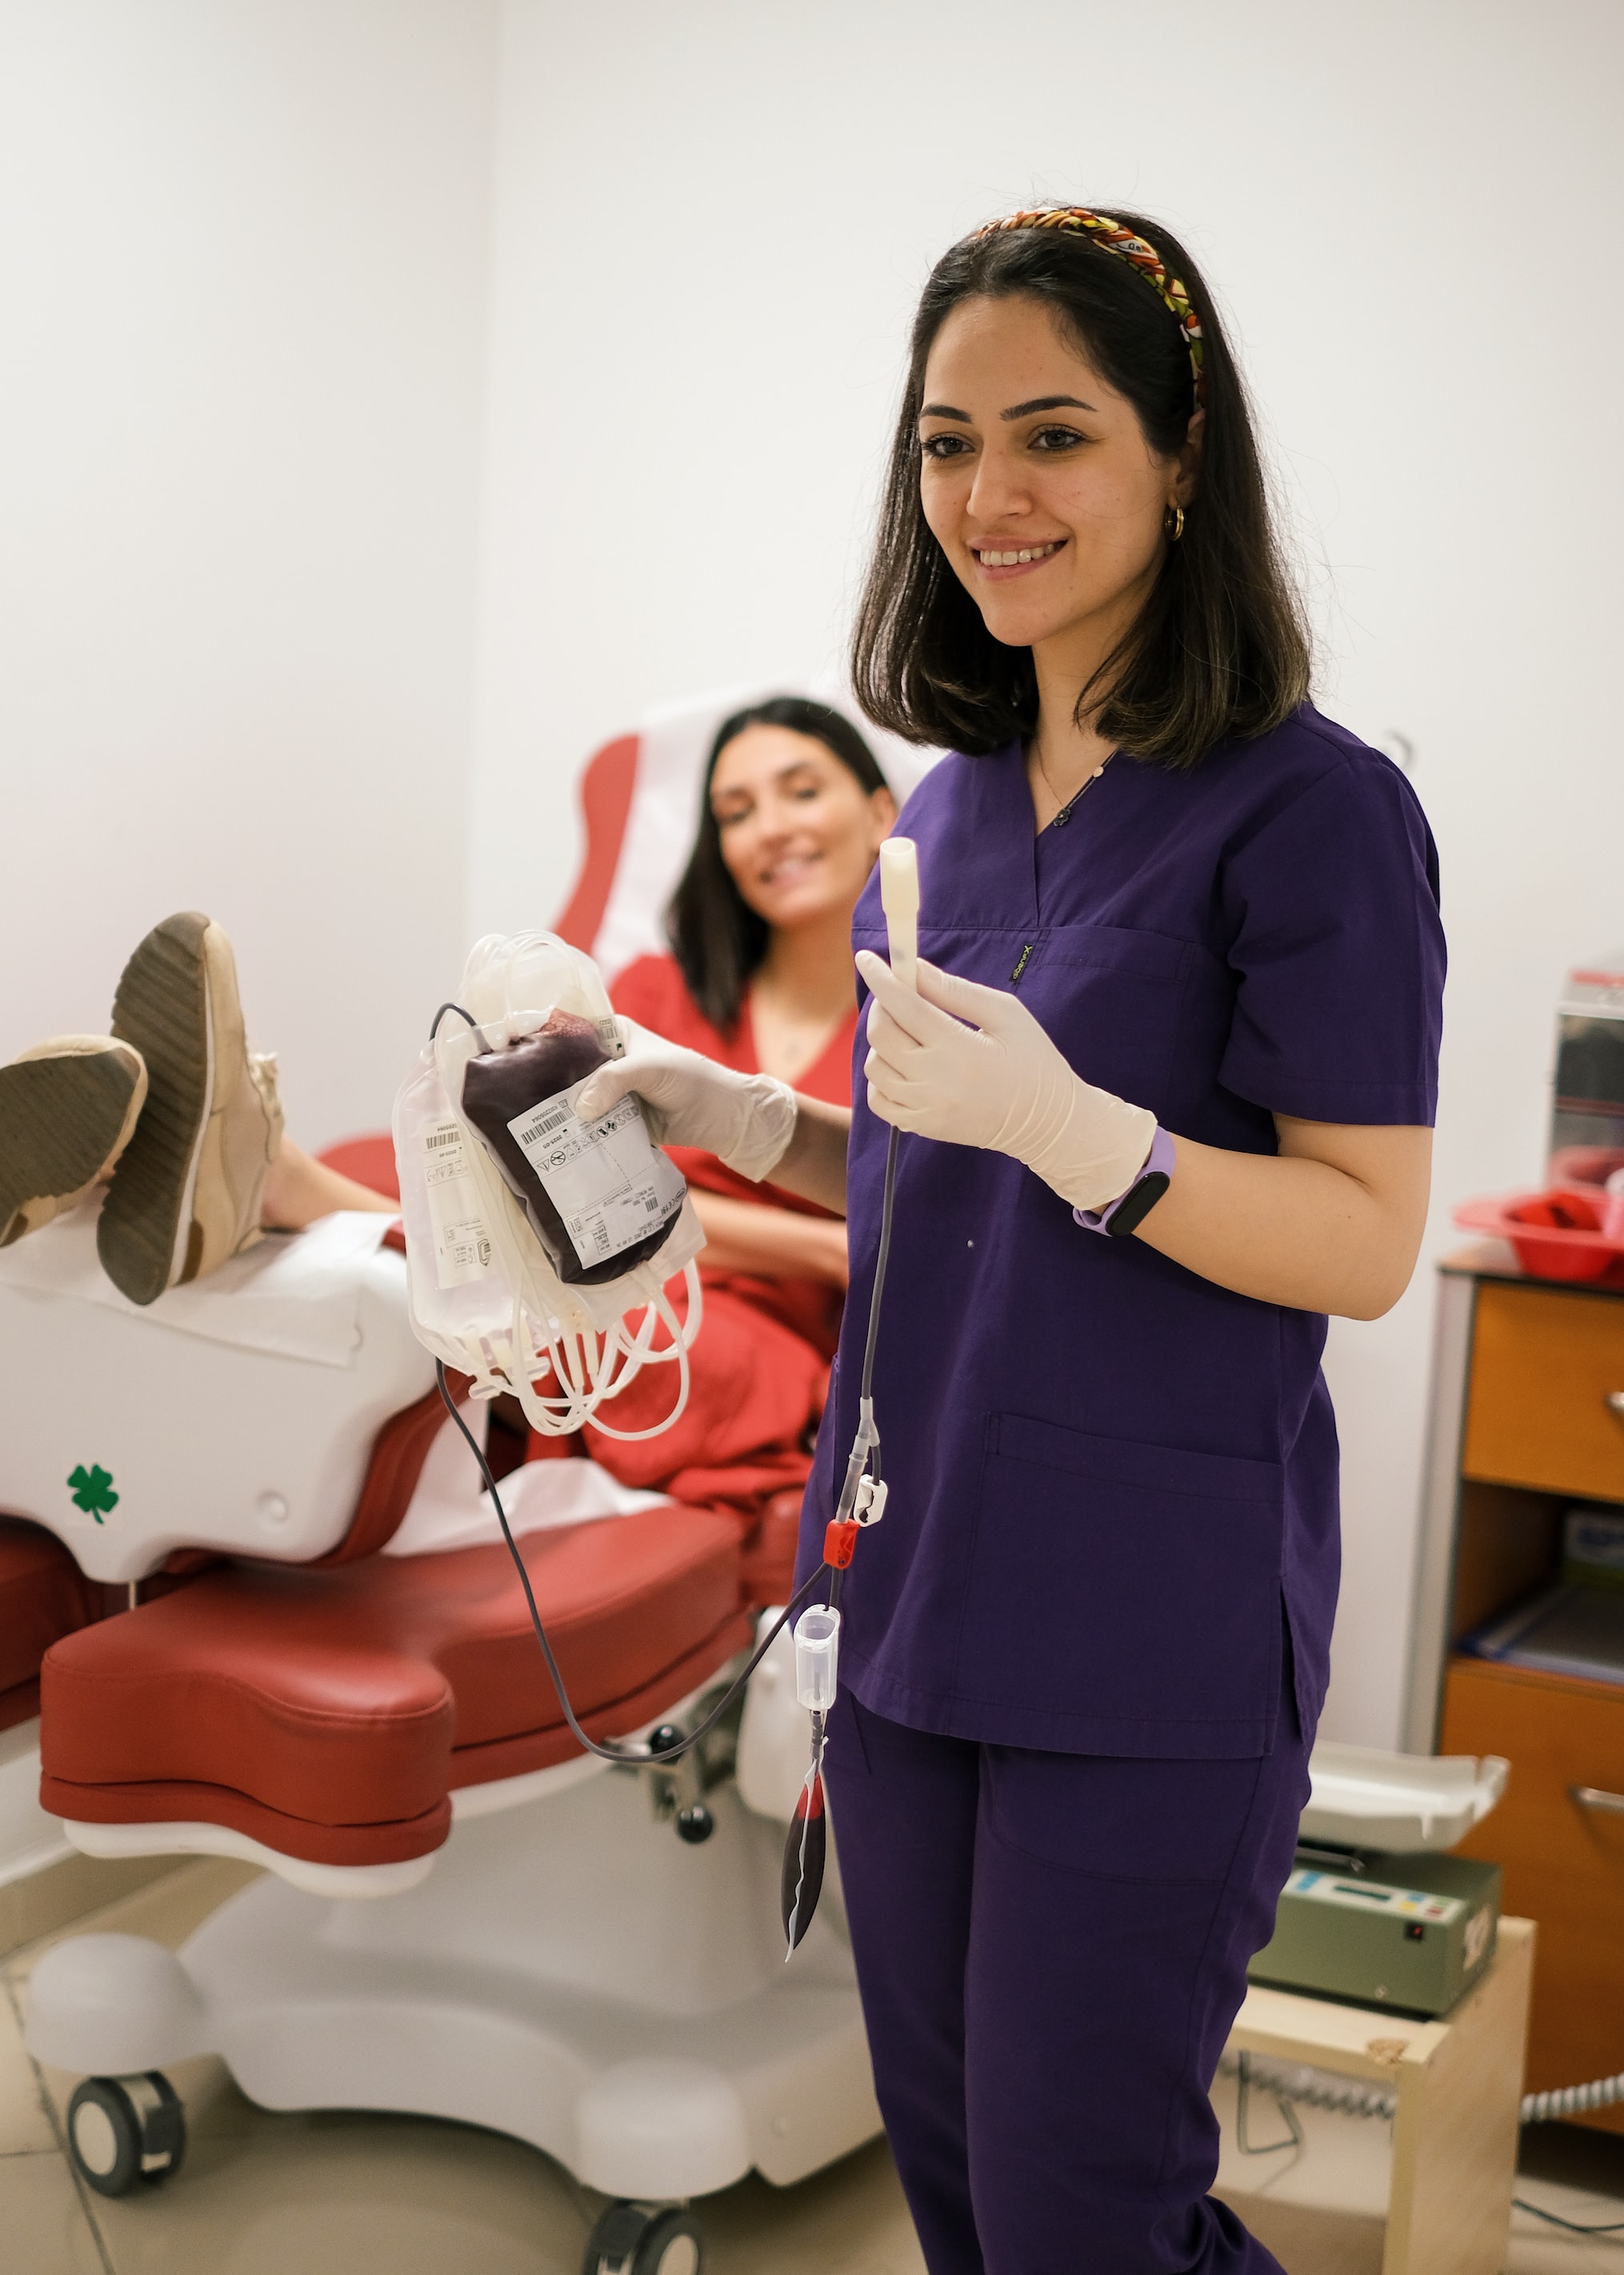 Blood-related jokes, donate blood with a smile